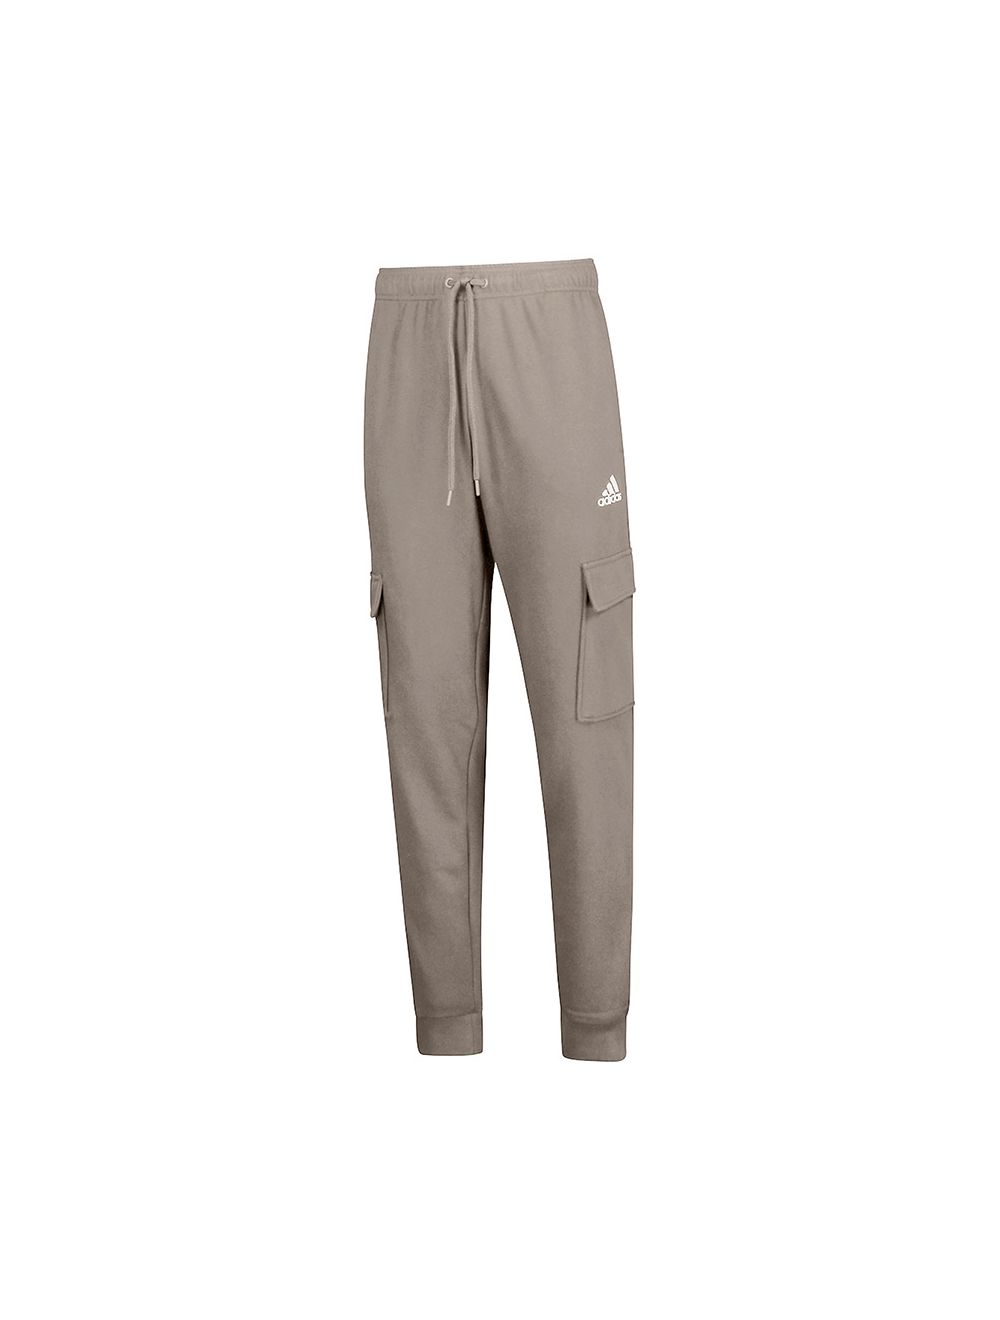 Adidas Mens Workout Pants in Mens Workout Clothing - Walmart.com